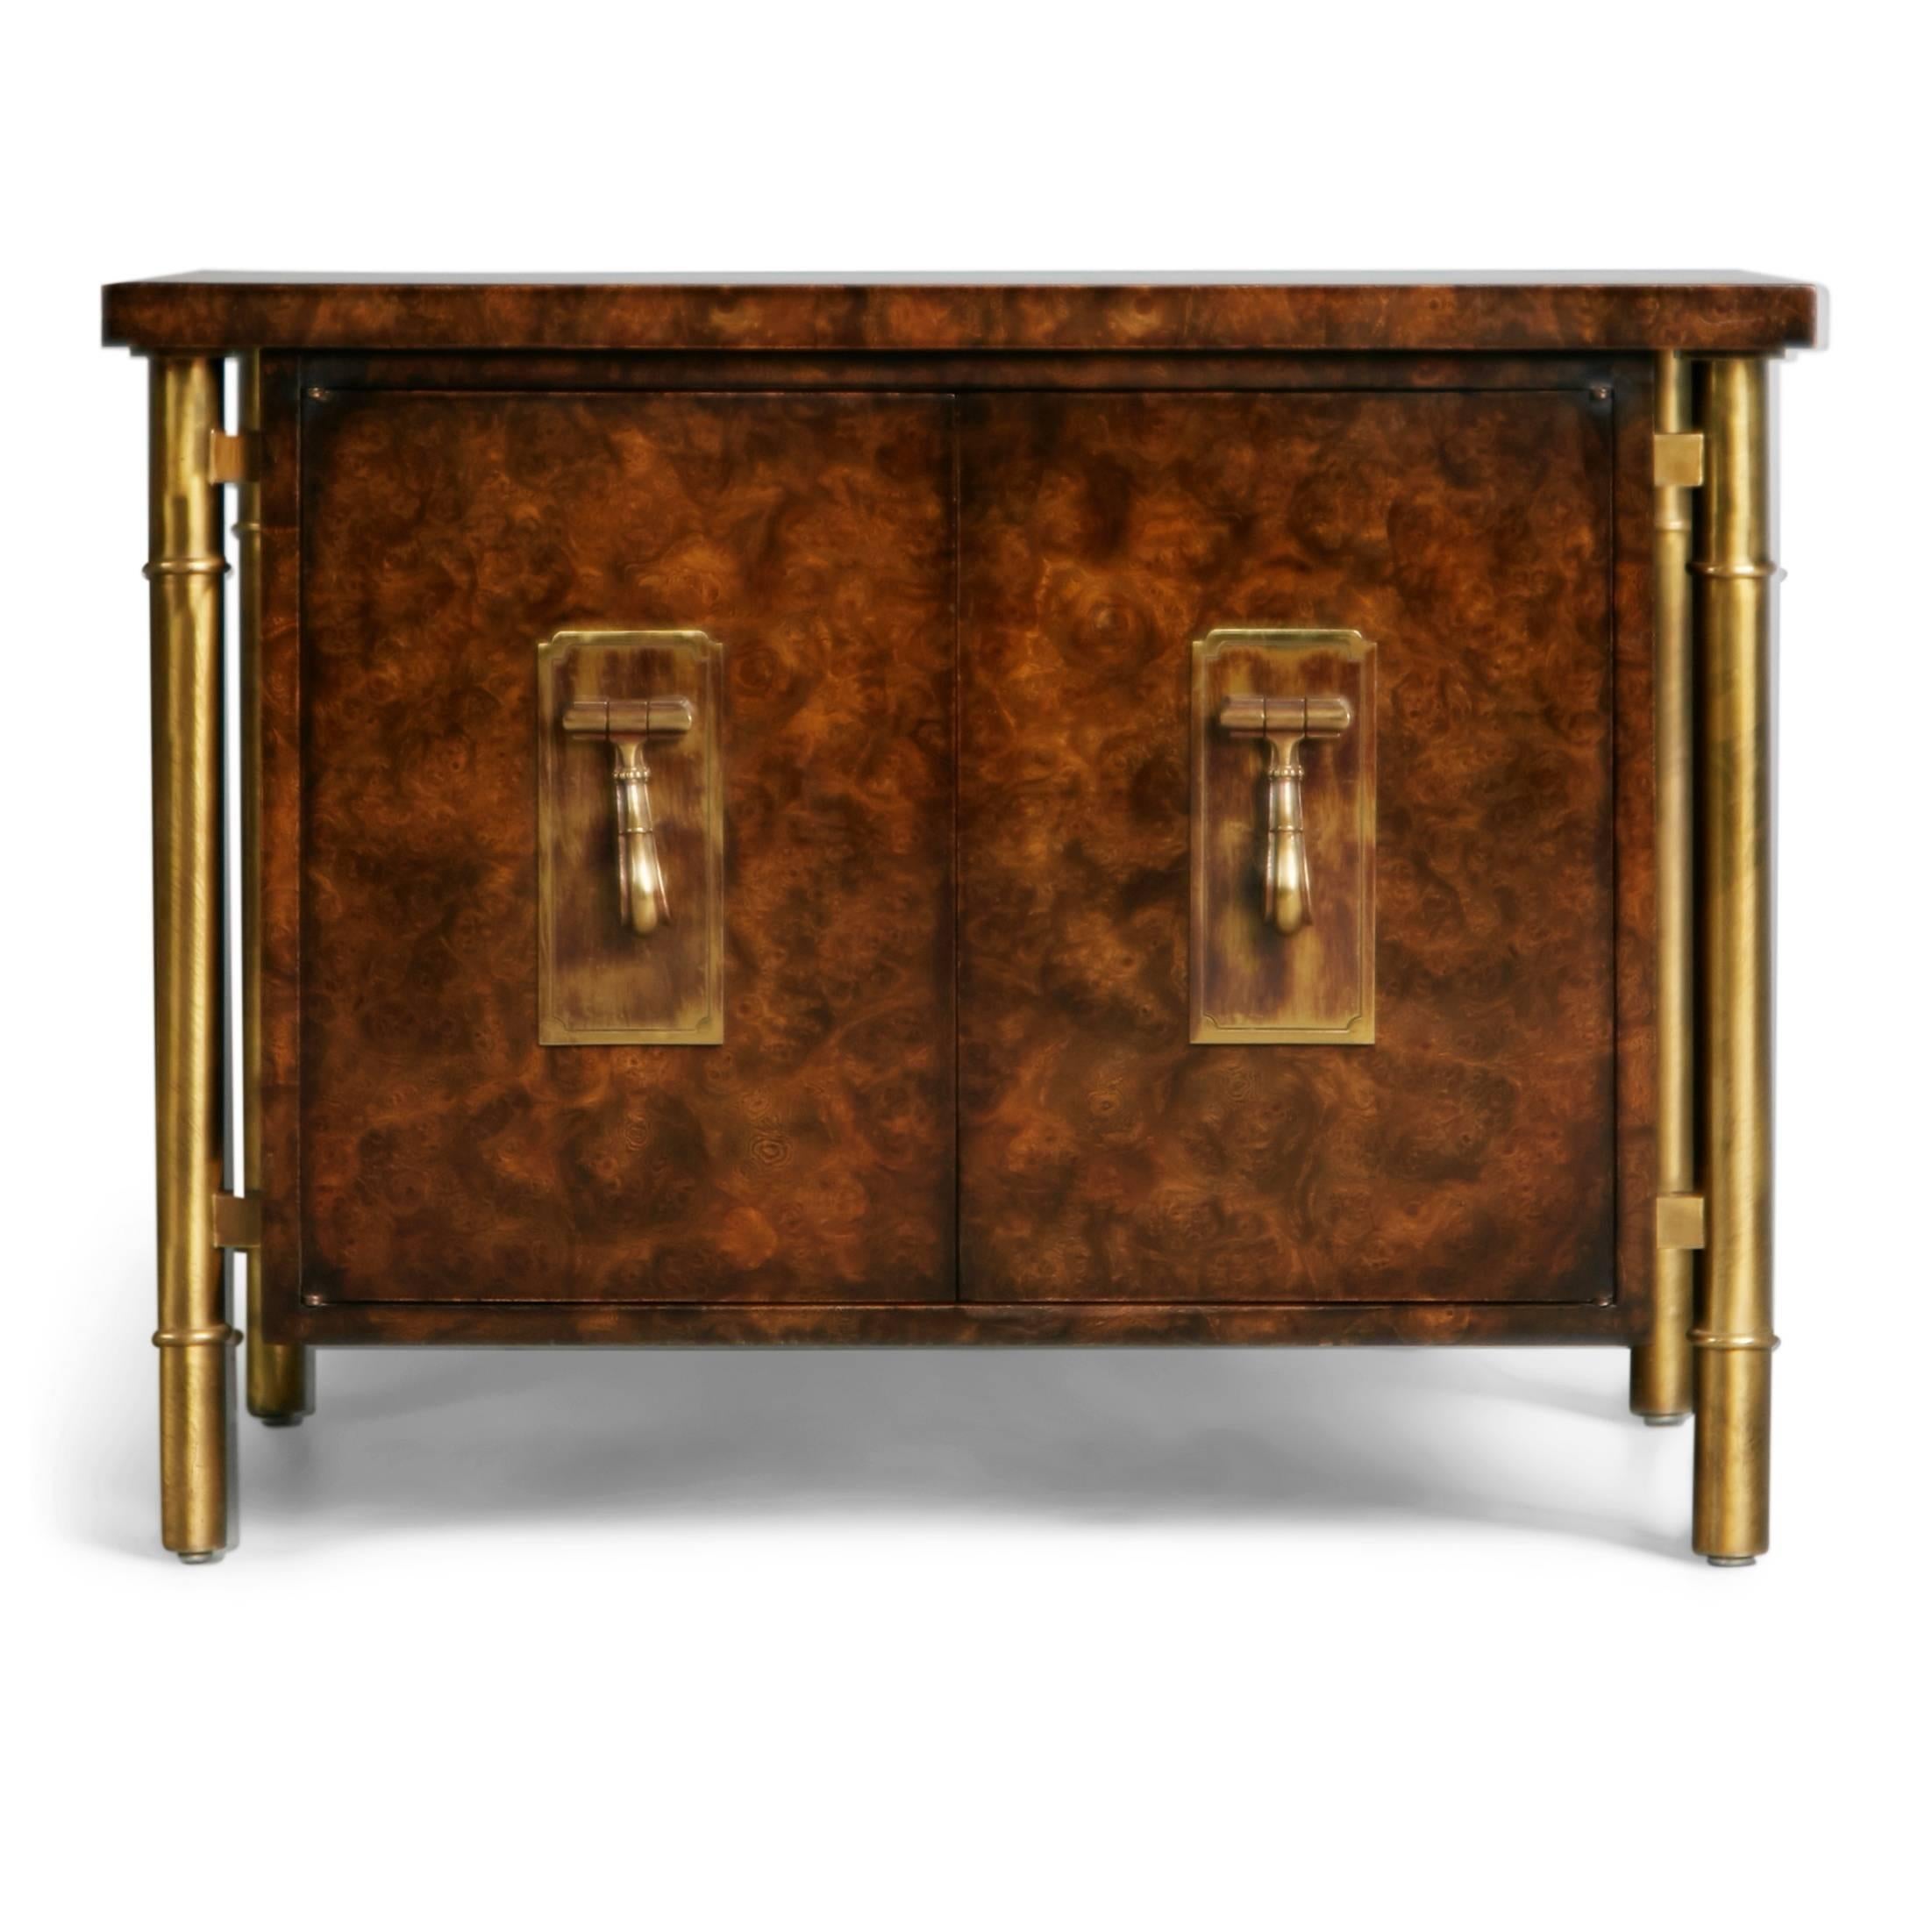 This Asian inspired Mastercraft side table / end table / nightstand / small cabinet piece by William Doezema for Mastercraft features a burl wood finish with brass cylindrical legs running the length of the cabinet from under the top down to the